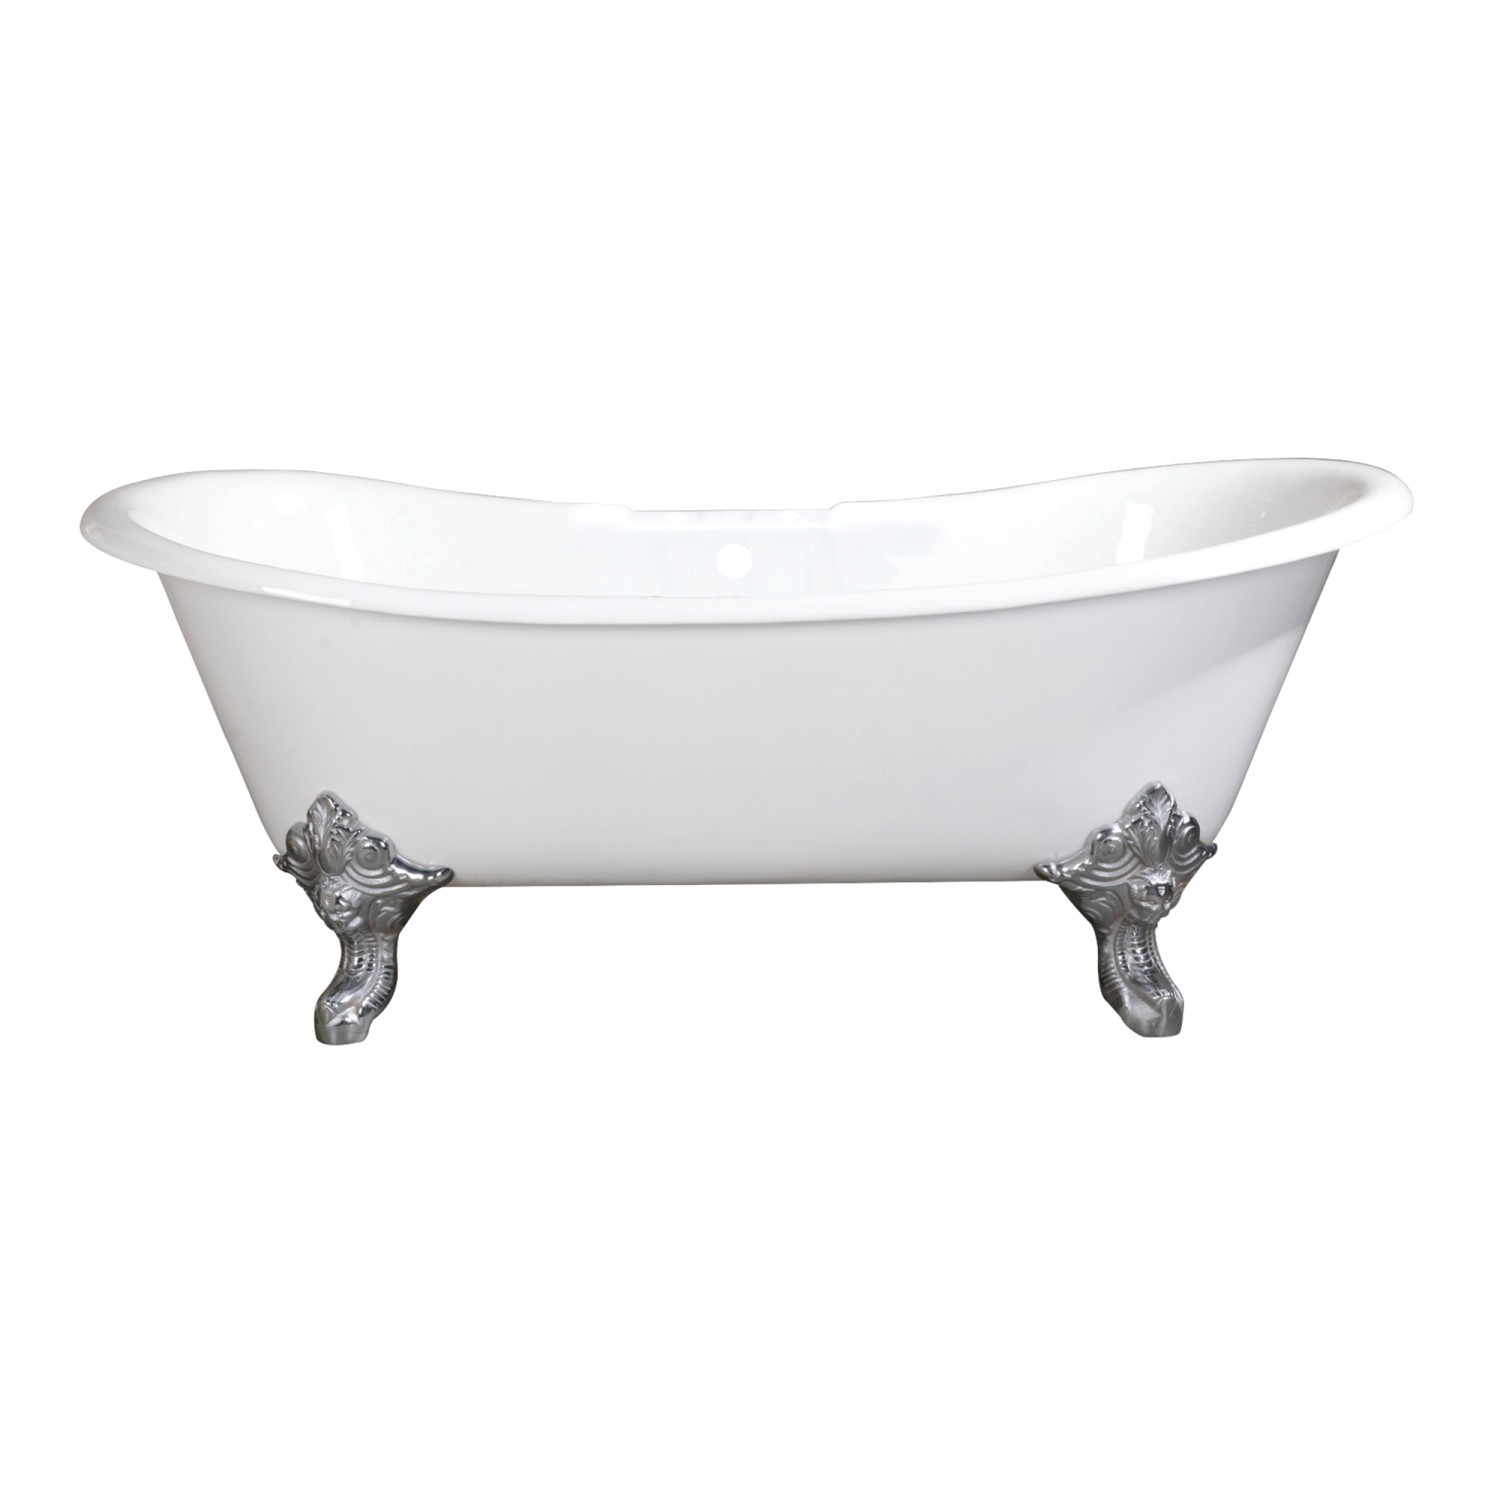 KINGSTON BRASS VCT7DS6731NL AQUA EDEN 67-INCH CAST IRON CLAWFOOT TUB WITH 7-INCH FAUCET DRILLINGS AND FEET